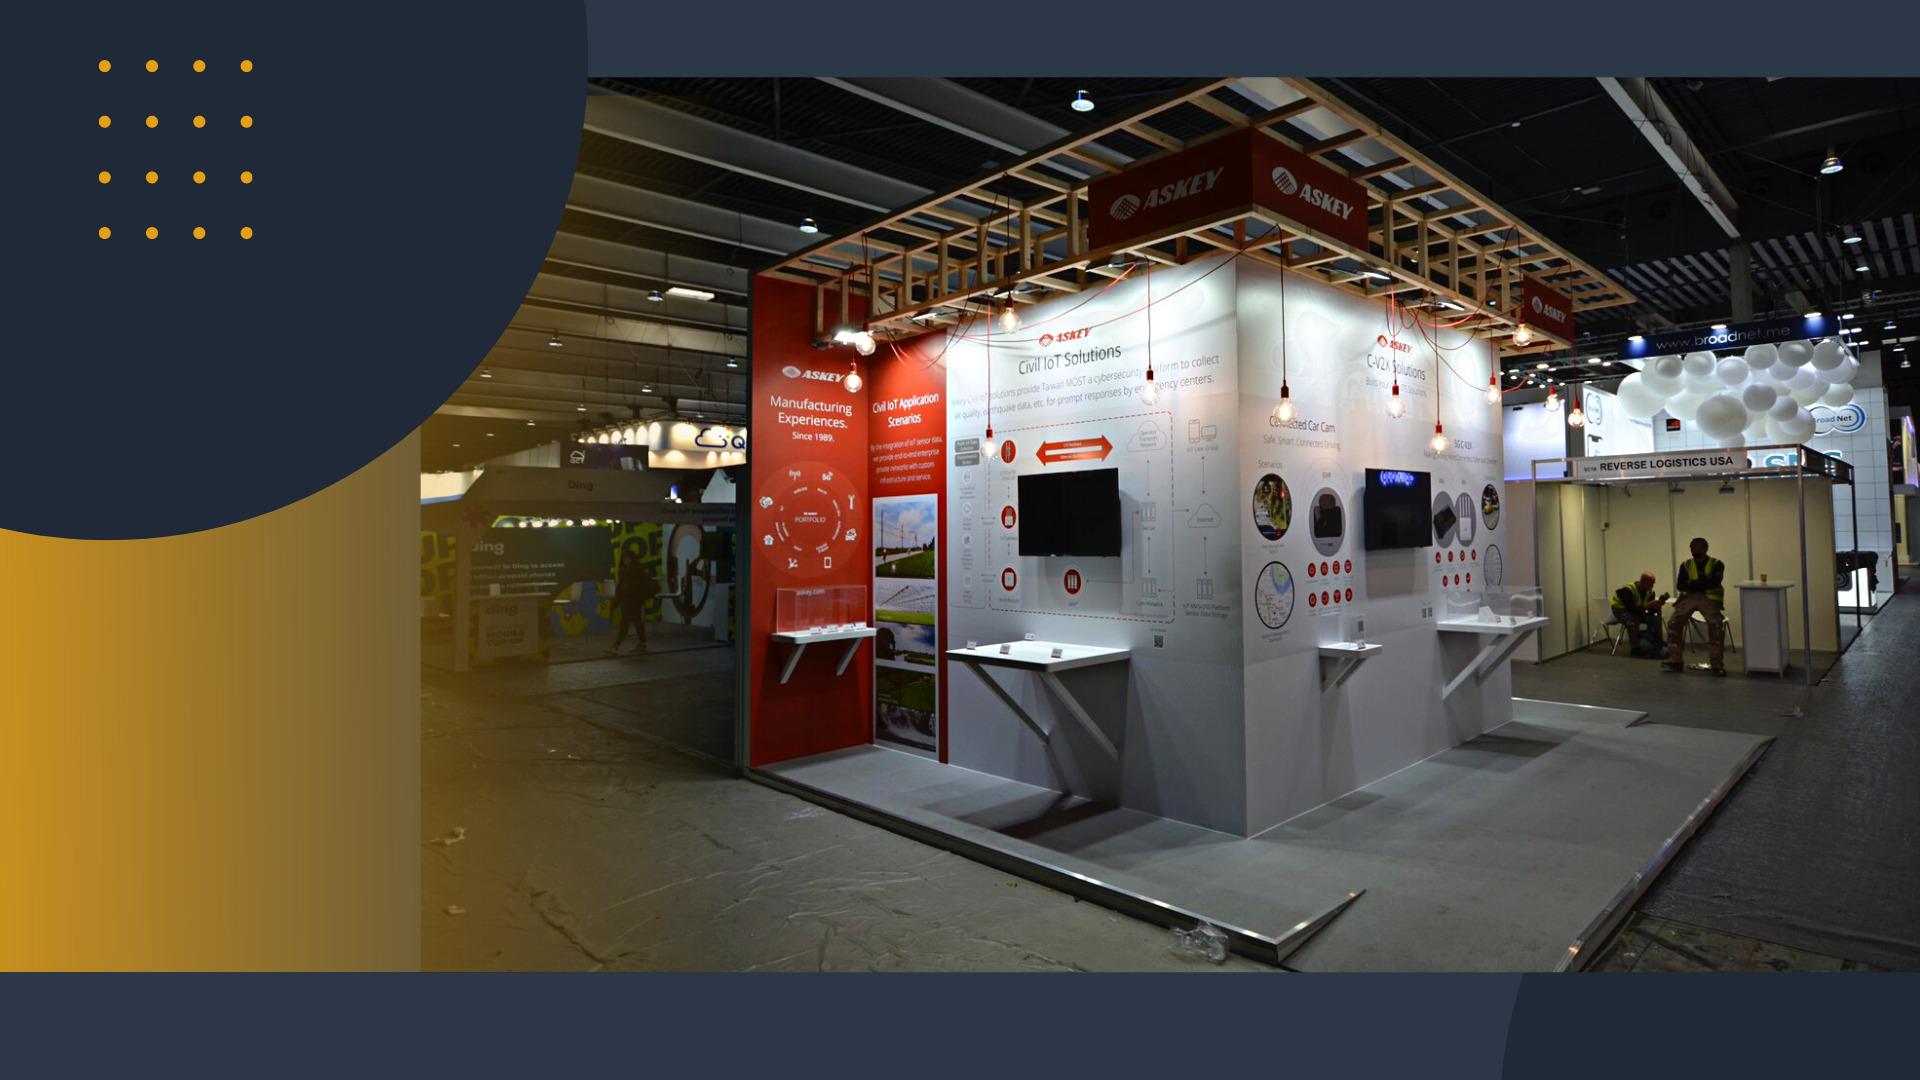 Askey, King One Design, Exhibition Design, Booth Design, MWC2022